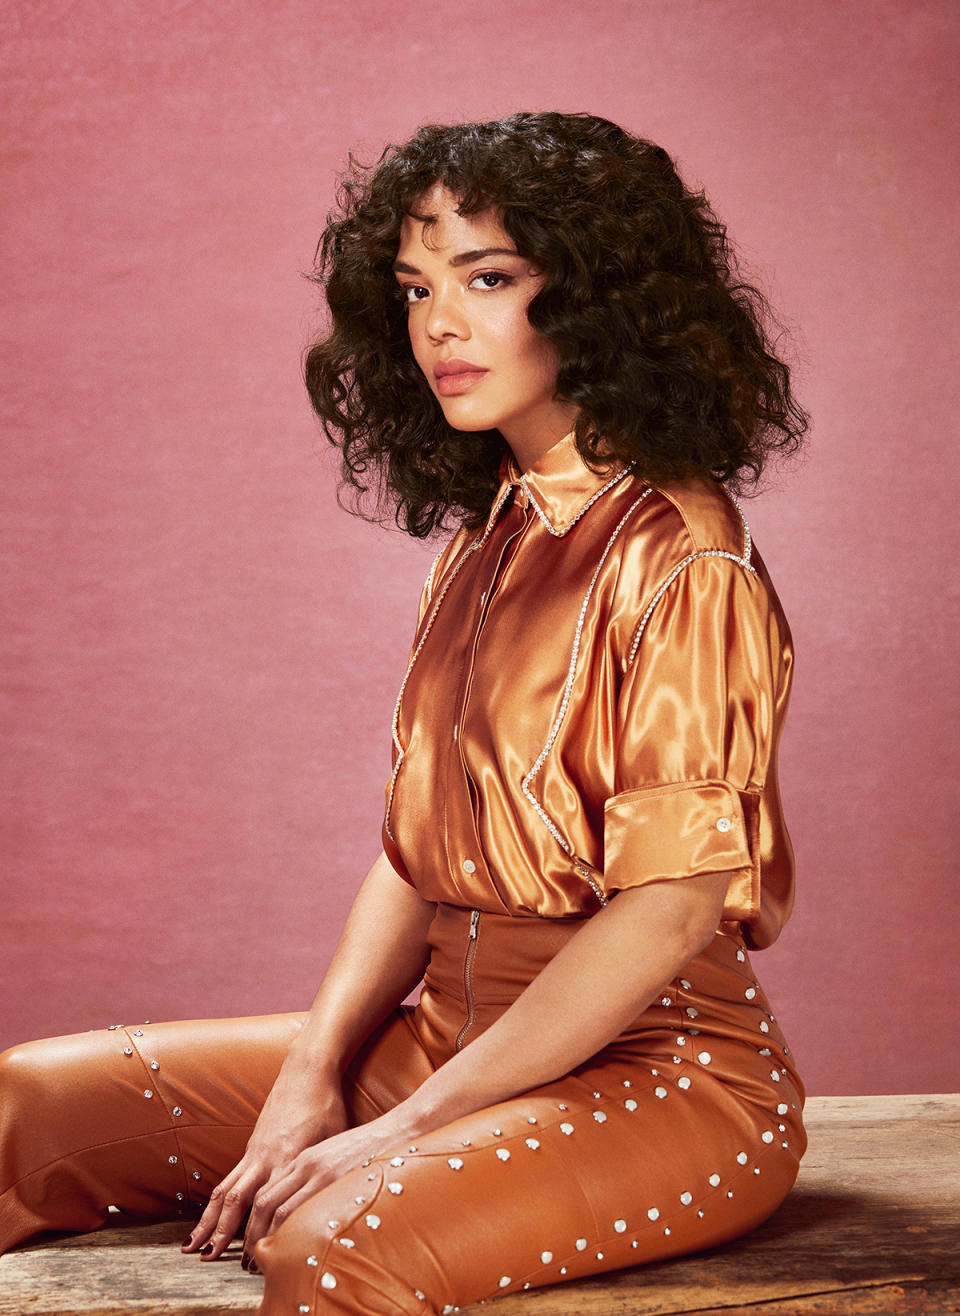 Tessa Thompson in Los Angeles, April 28, 2019. | Gizelle Hernandez for TIME